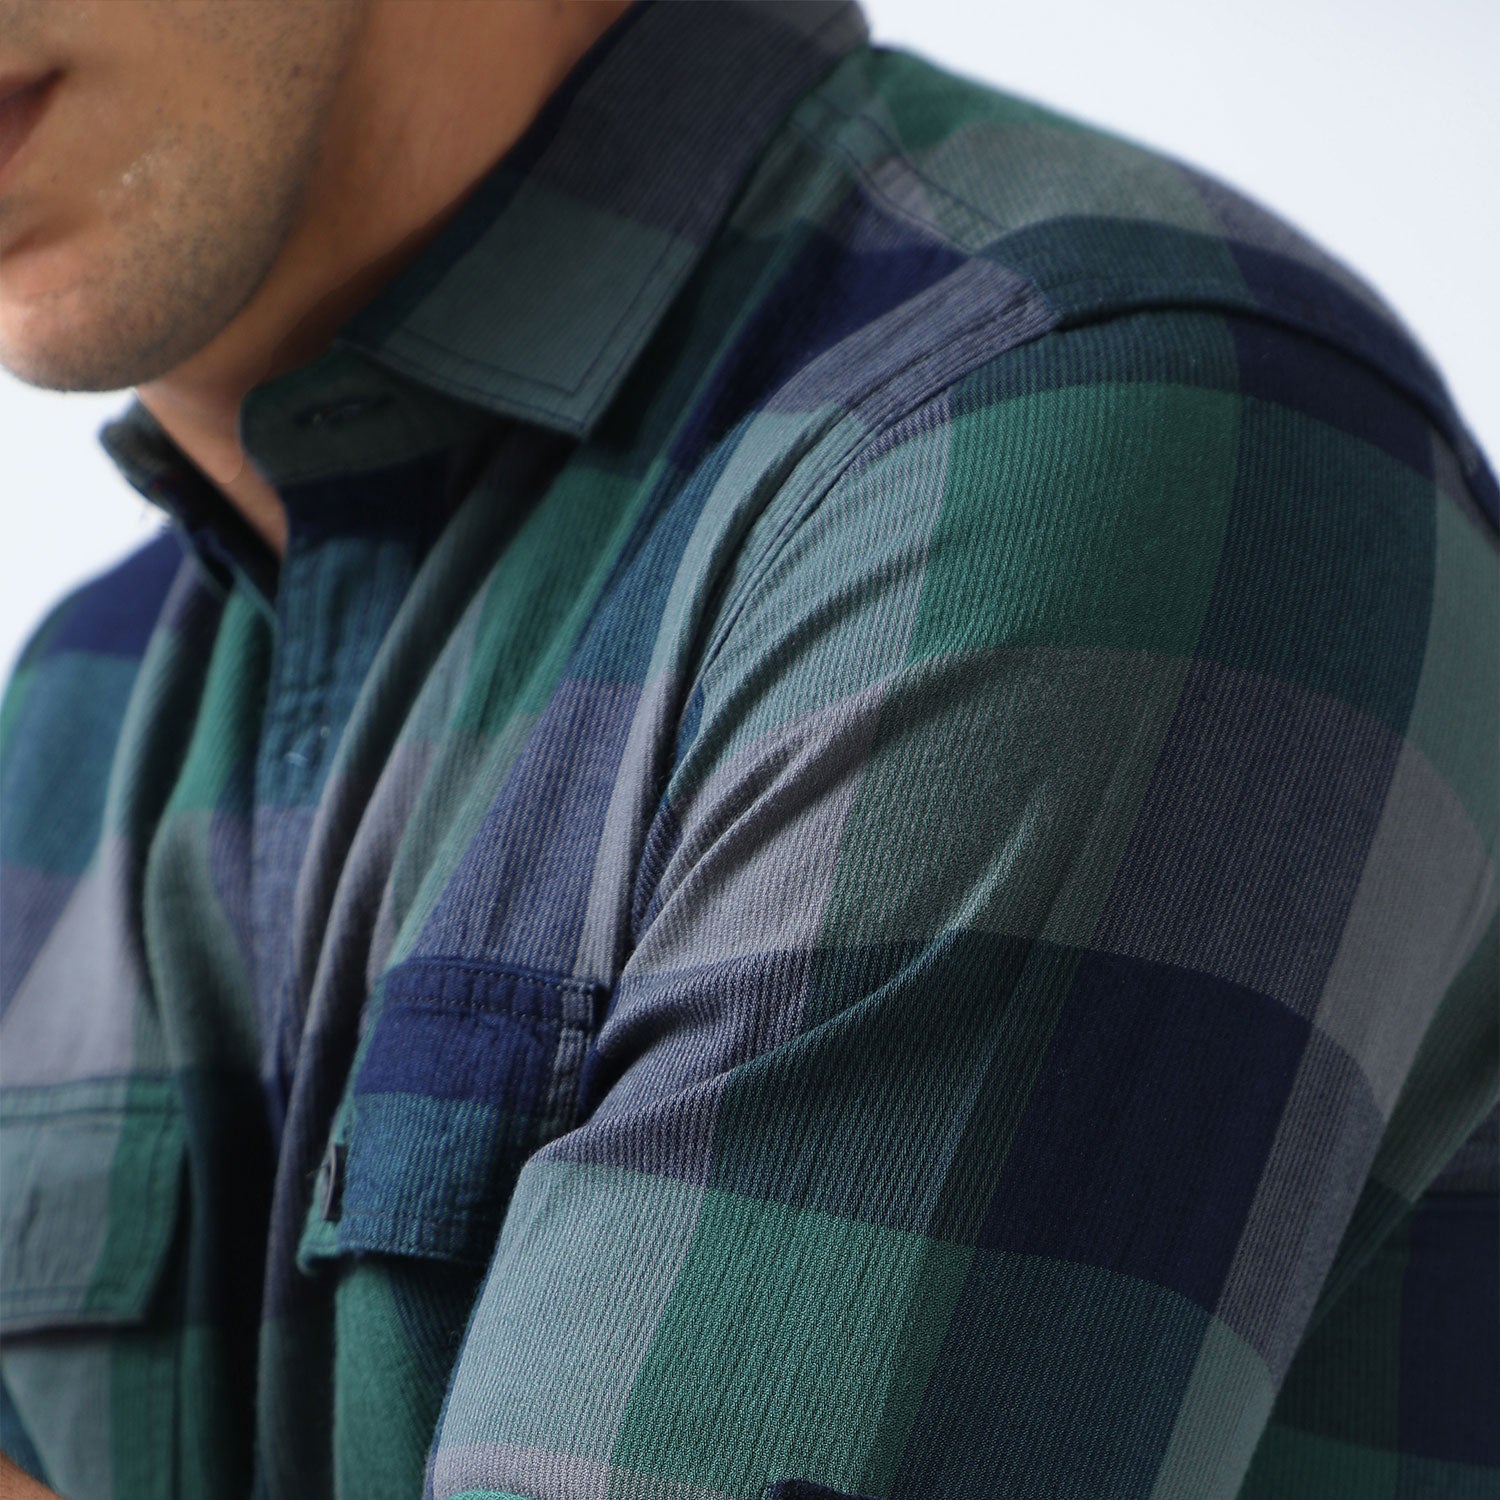 Buy Trendy Green And Blue Check Shirt OnlineRs. 1399.00